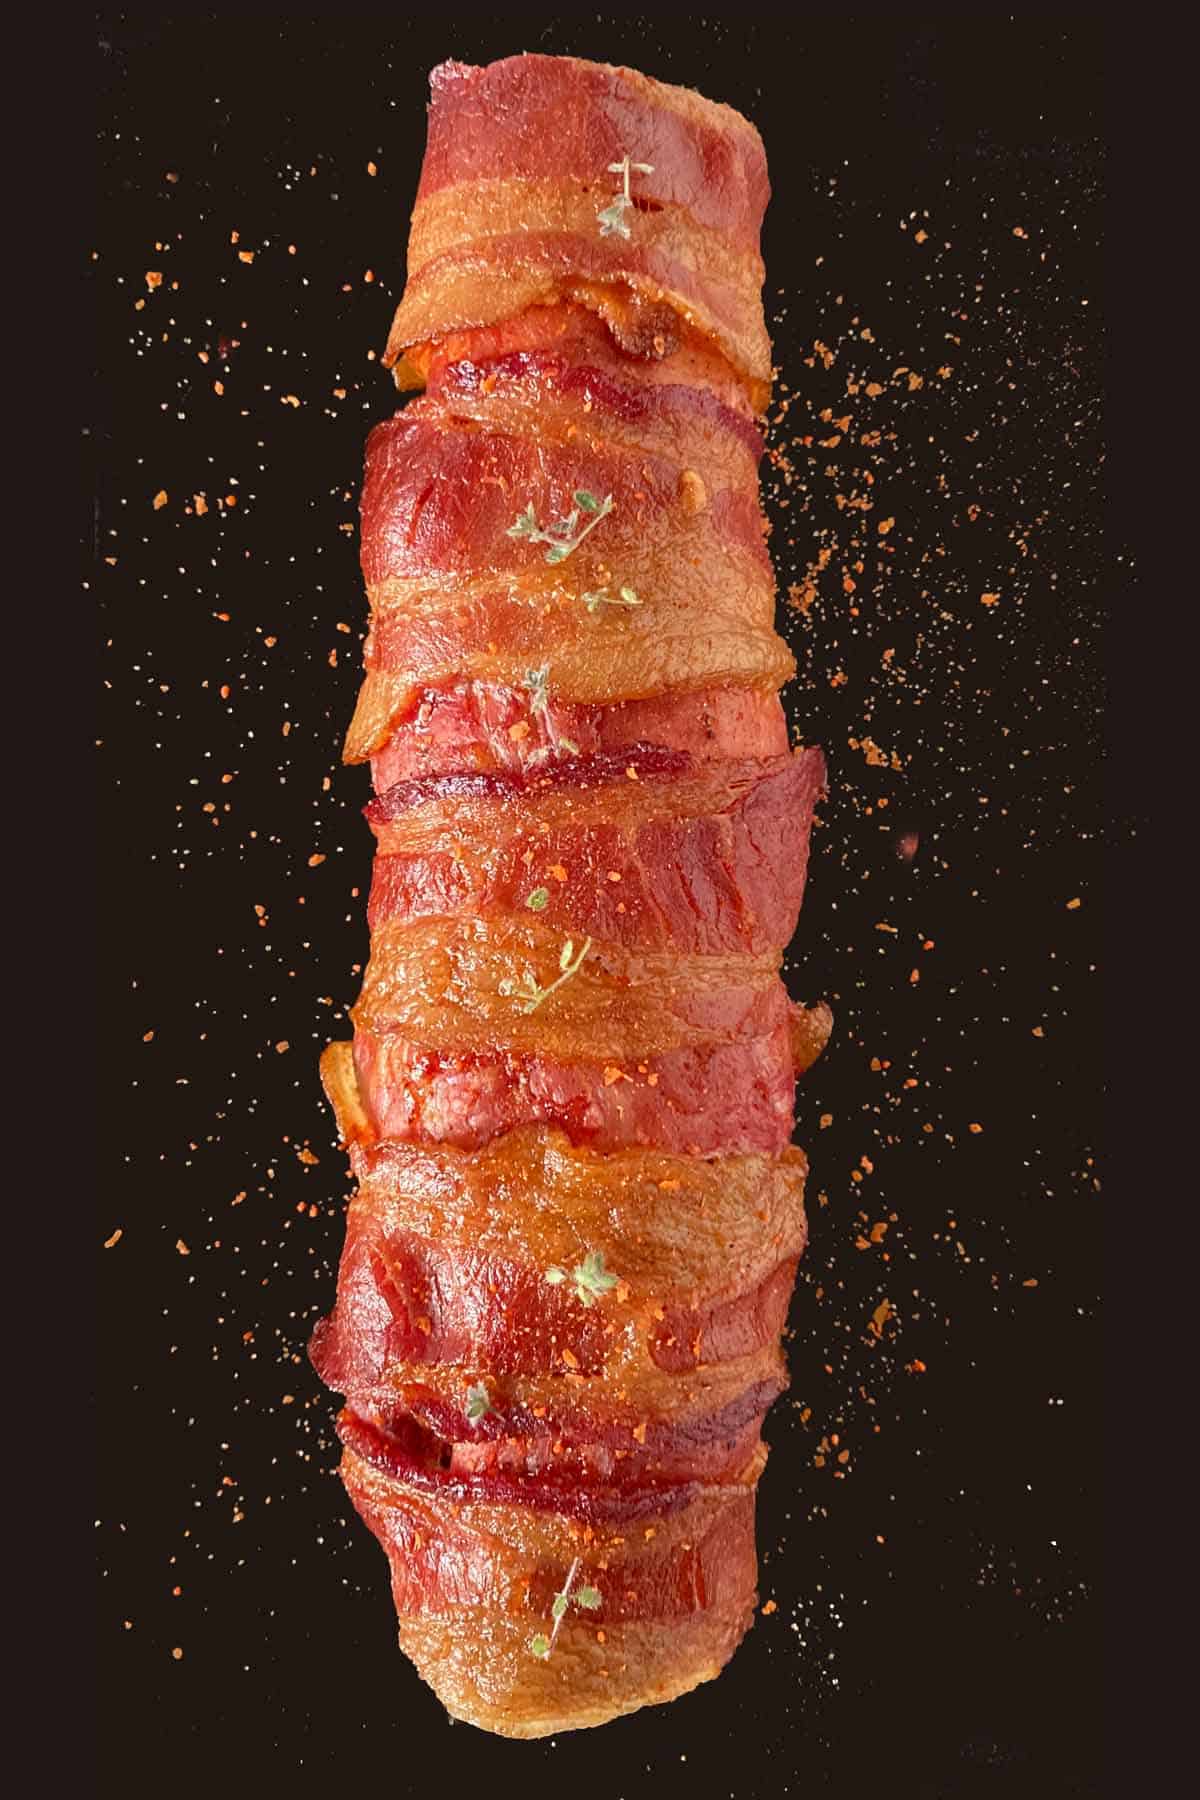 Fully cooked smoked pork tenderloin wrapped in bacon, sprinkled with rub and served on a black platter.